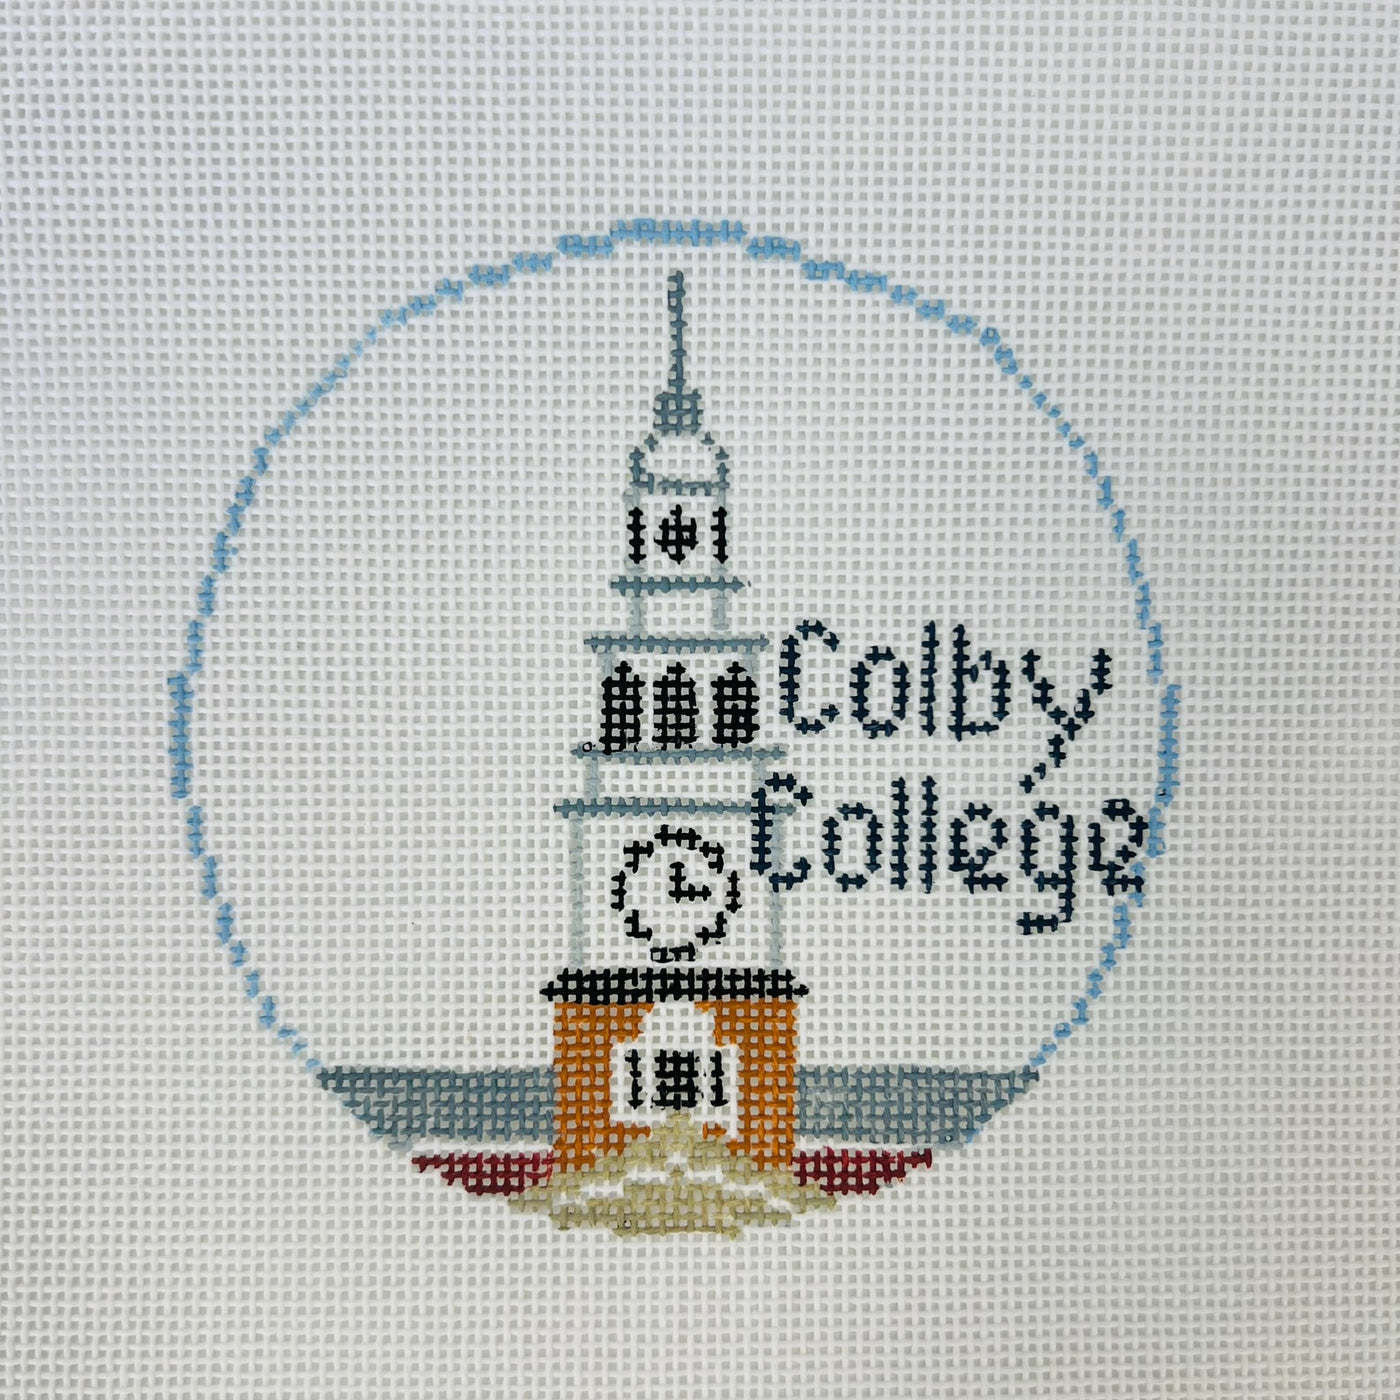 Colby College Round Ornament Needlepoint Canvas